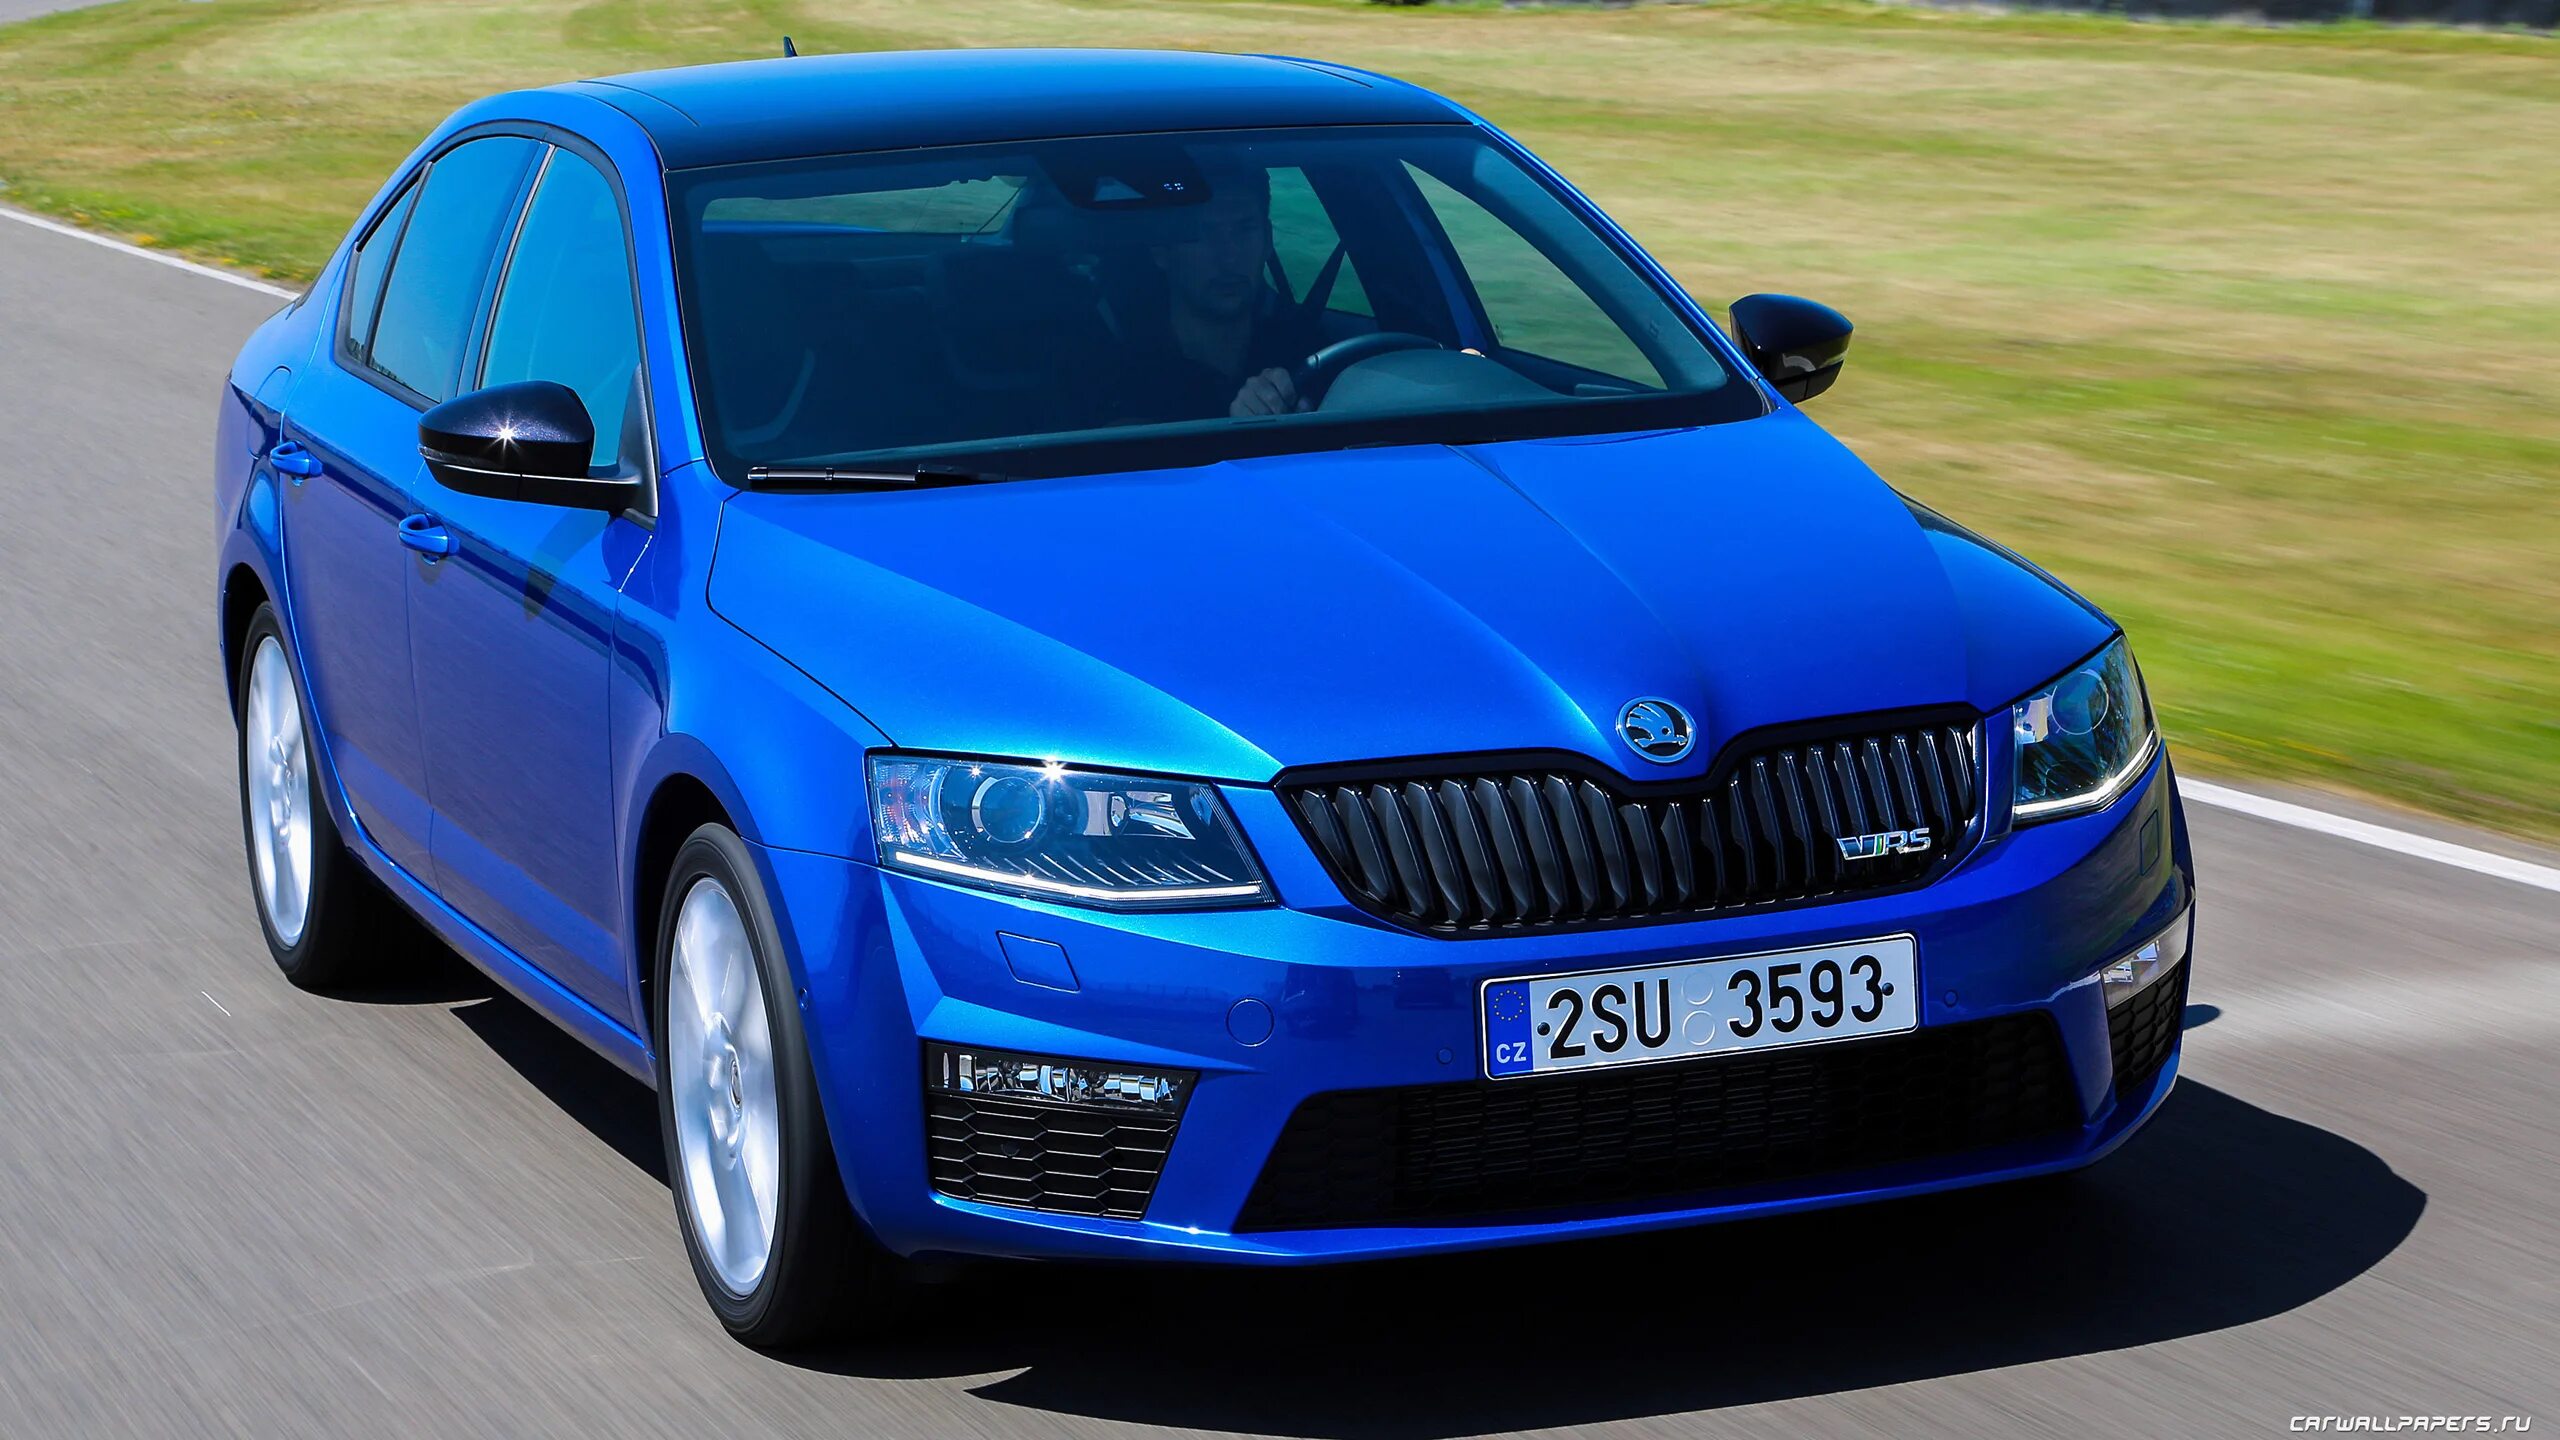 Skoda octavia rs 2015. Skoda Octavia RS 2014. Skoda Octavia RS 2013.